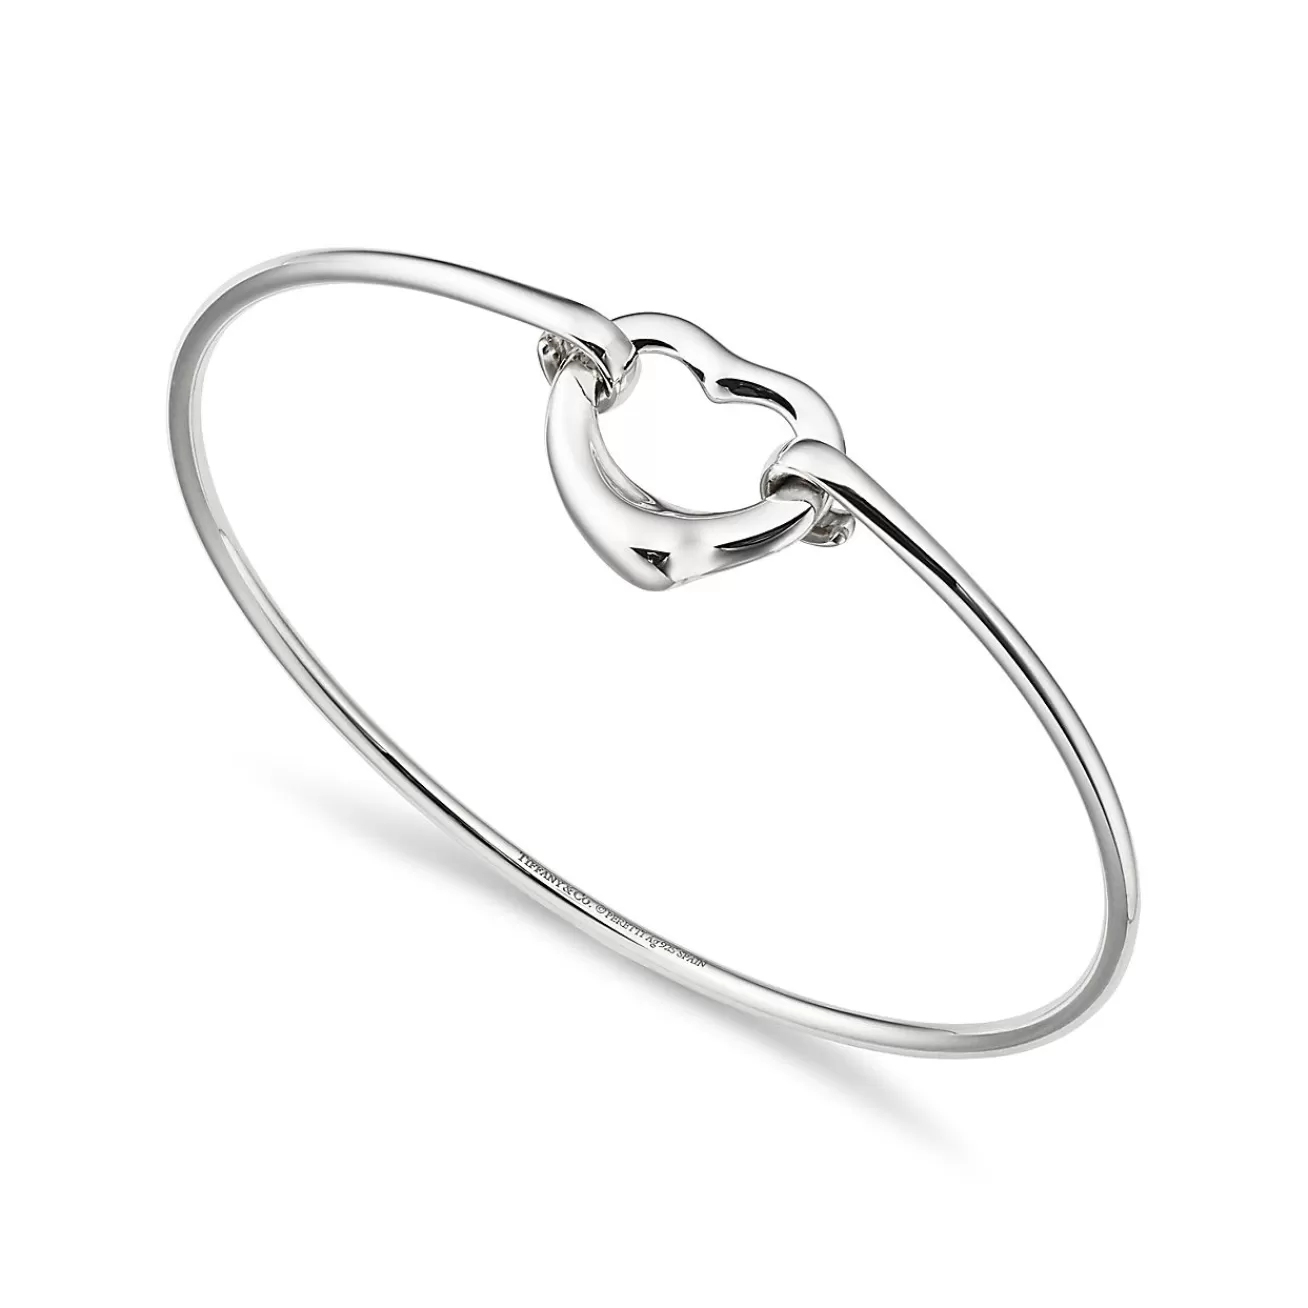 Tiffany & Co. Elsa Peretti® Open Heart bangle in sterling silver, medium. | ^ Bracelets | Gifts for Her